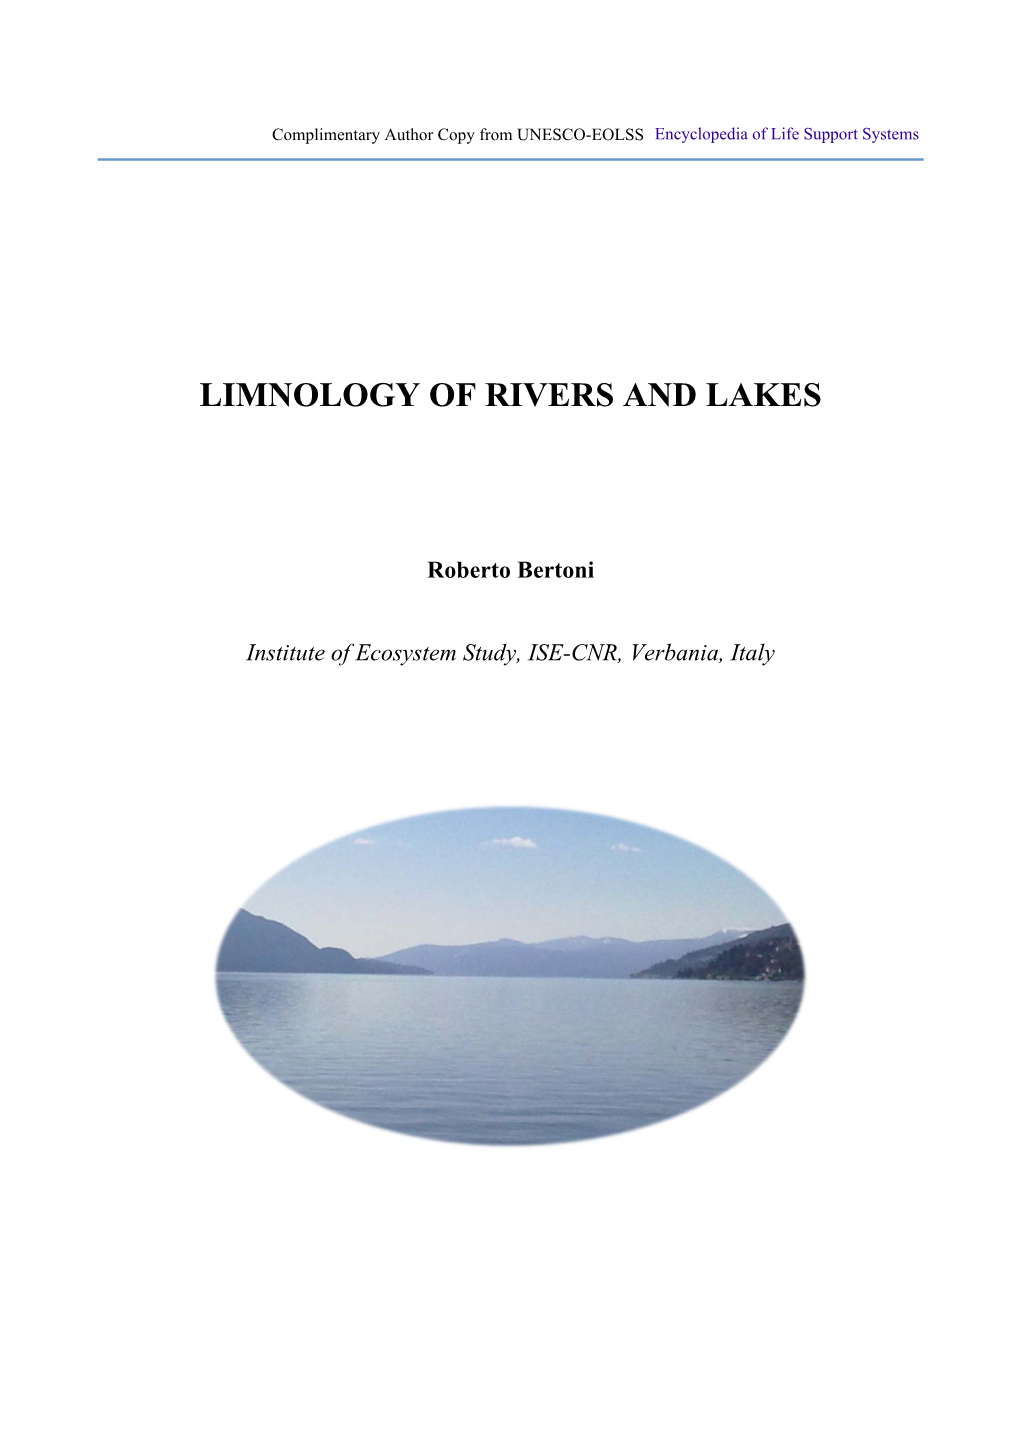 Limnology of Rivers and Lakes